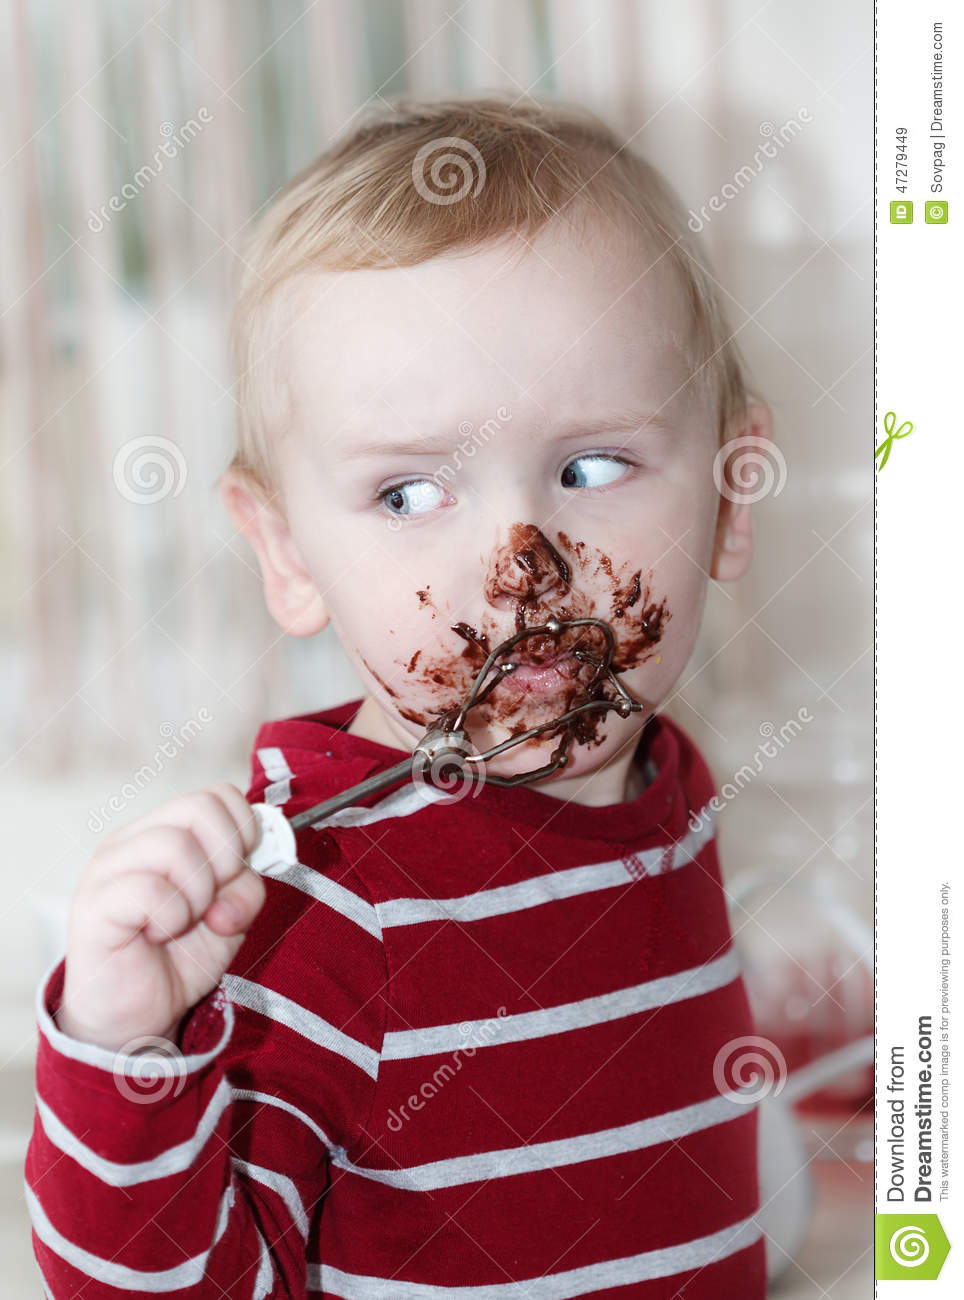 Chocolate On Face Funny Cute Eating Boy Messy Eater 